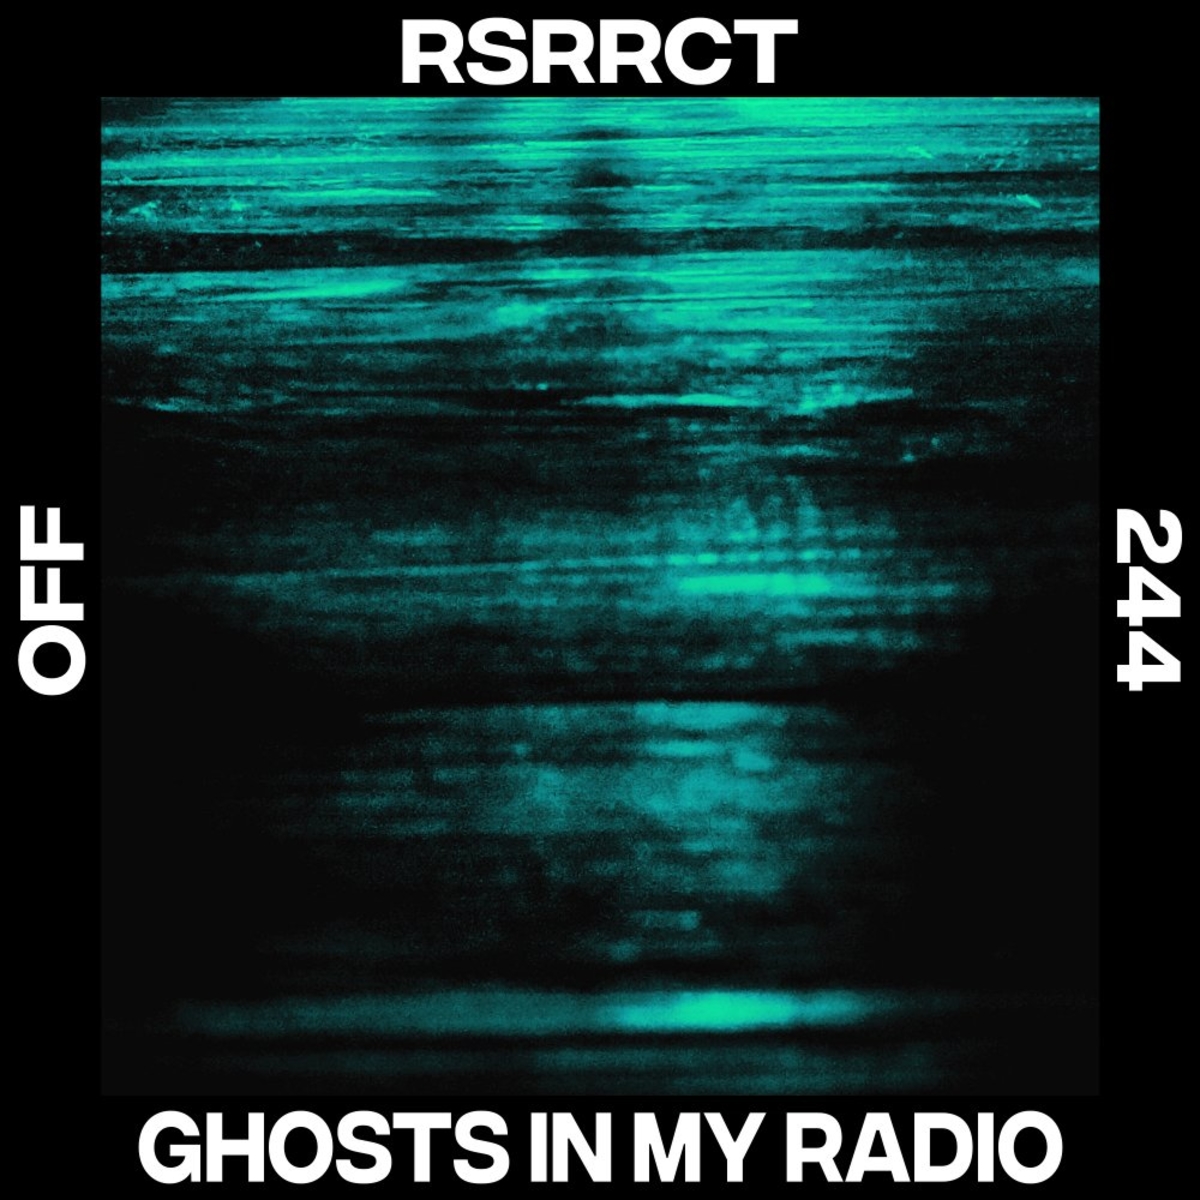 RSRRCT - Ghosts In My Radio [OFF244]